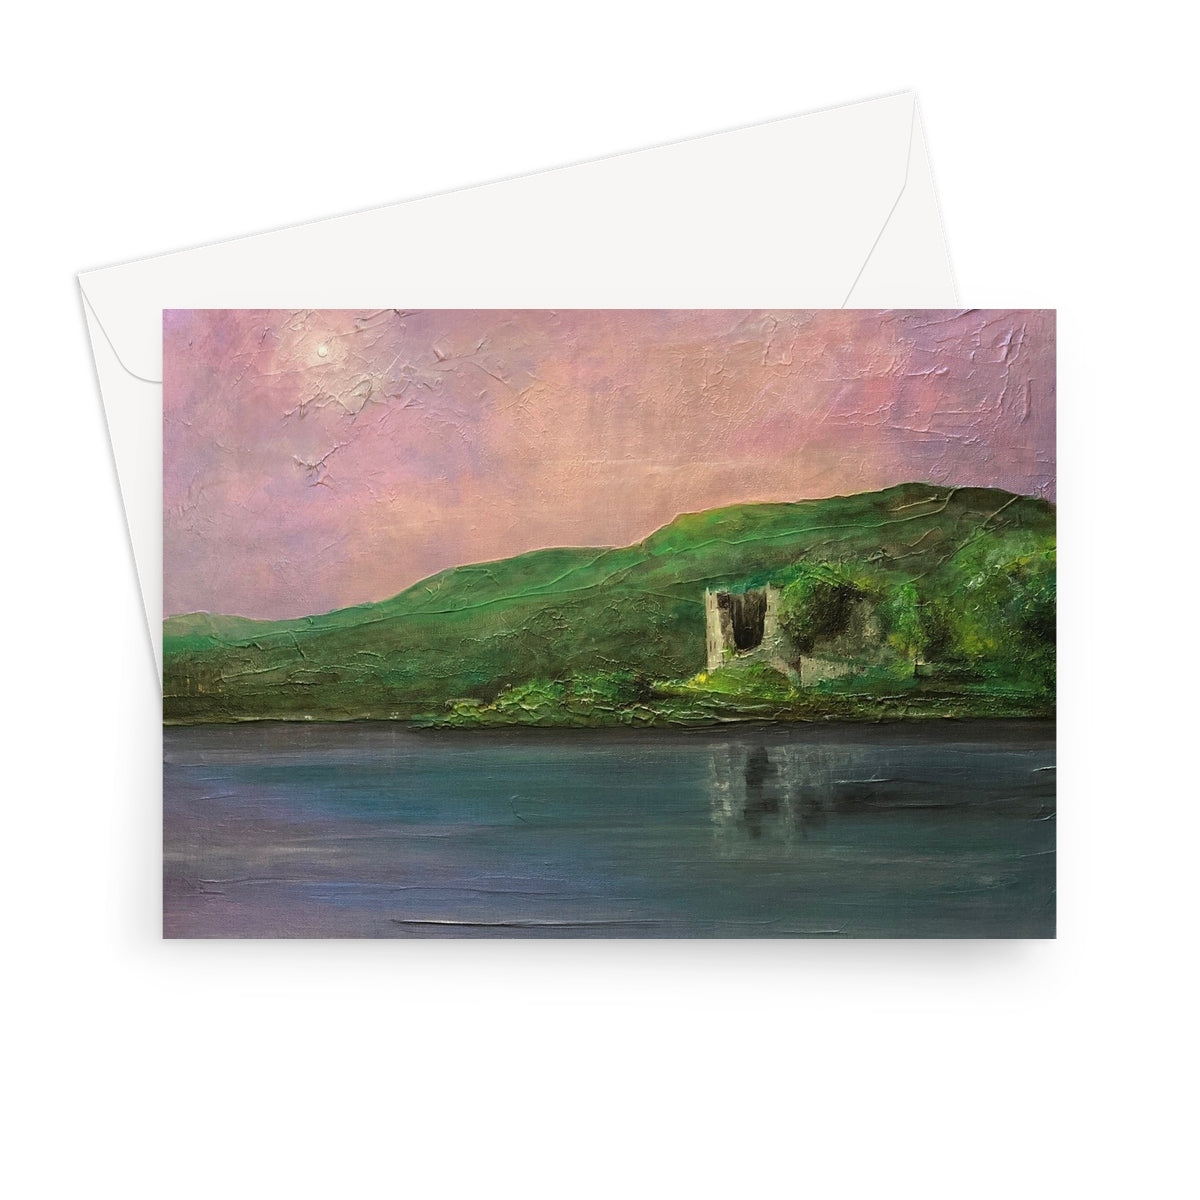 Old Castle Lachlan Art Gifts Greeting Card-Stationery-Prodigi-7"x5"-10 Cards-Paintings, Prints, Homeware, Art Gifts From Scotland By Scottish Artist Kevin Hunter